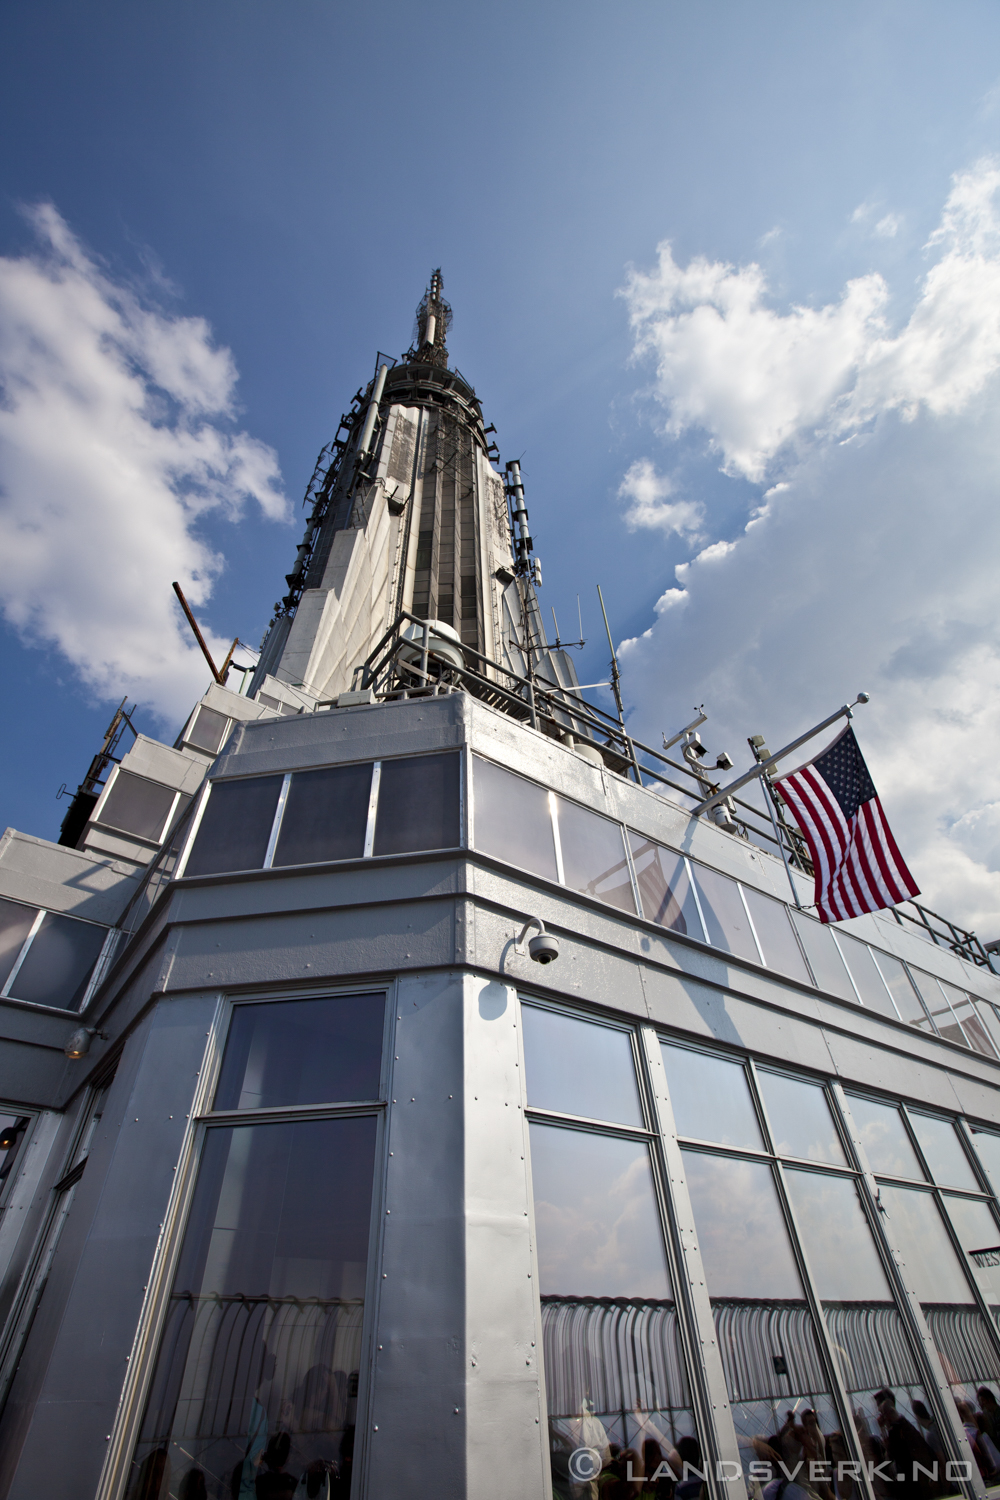 The top of the Empire State Building, New York. 

(Canon EOS 5D Mark II / Canon EF 16-35mm f/2.8 L II USM)